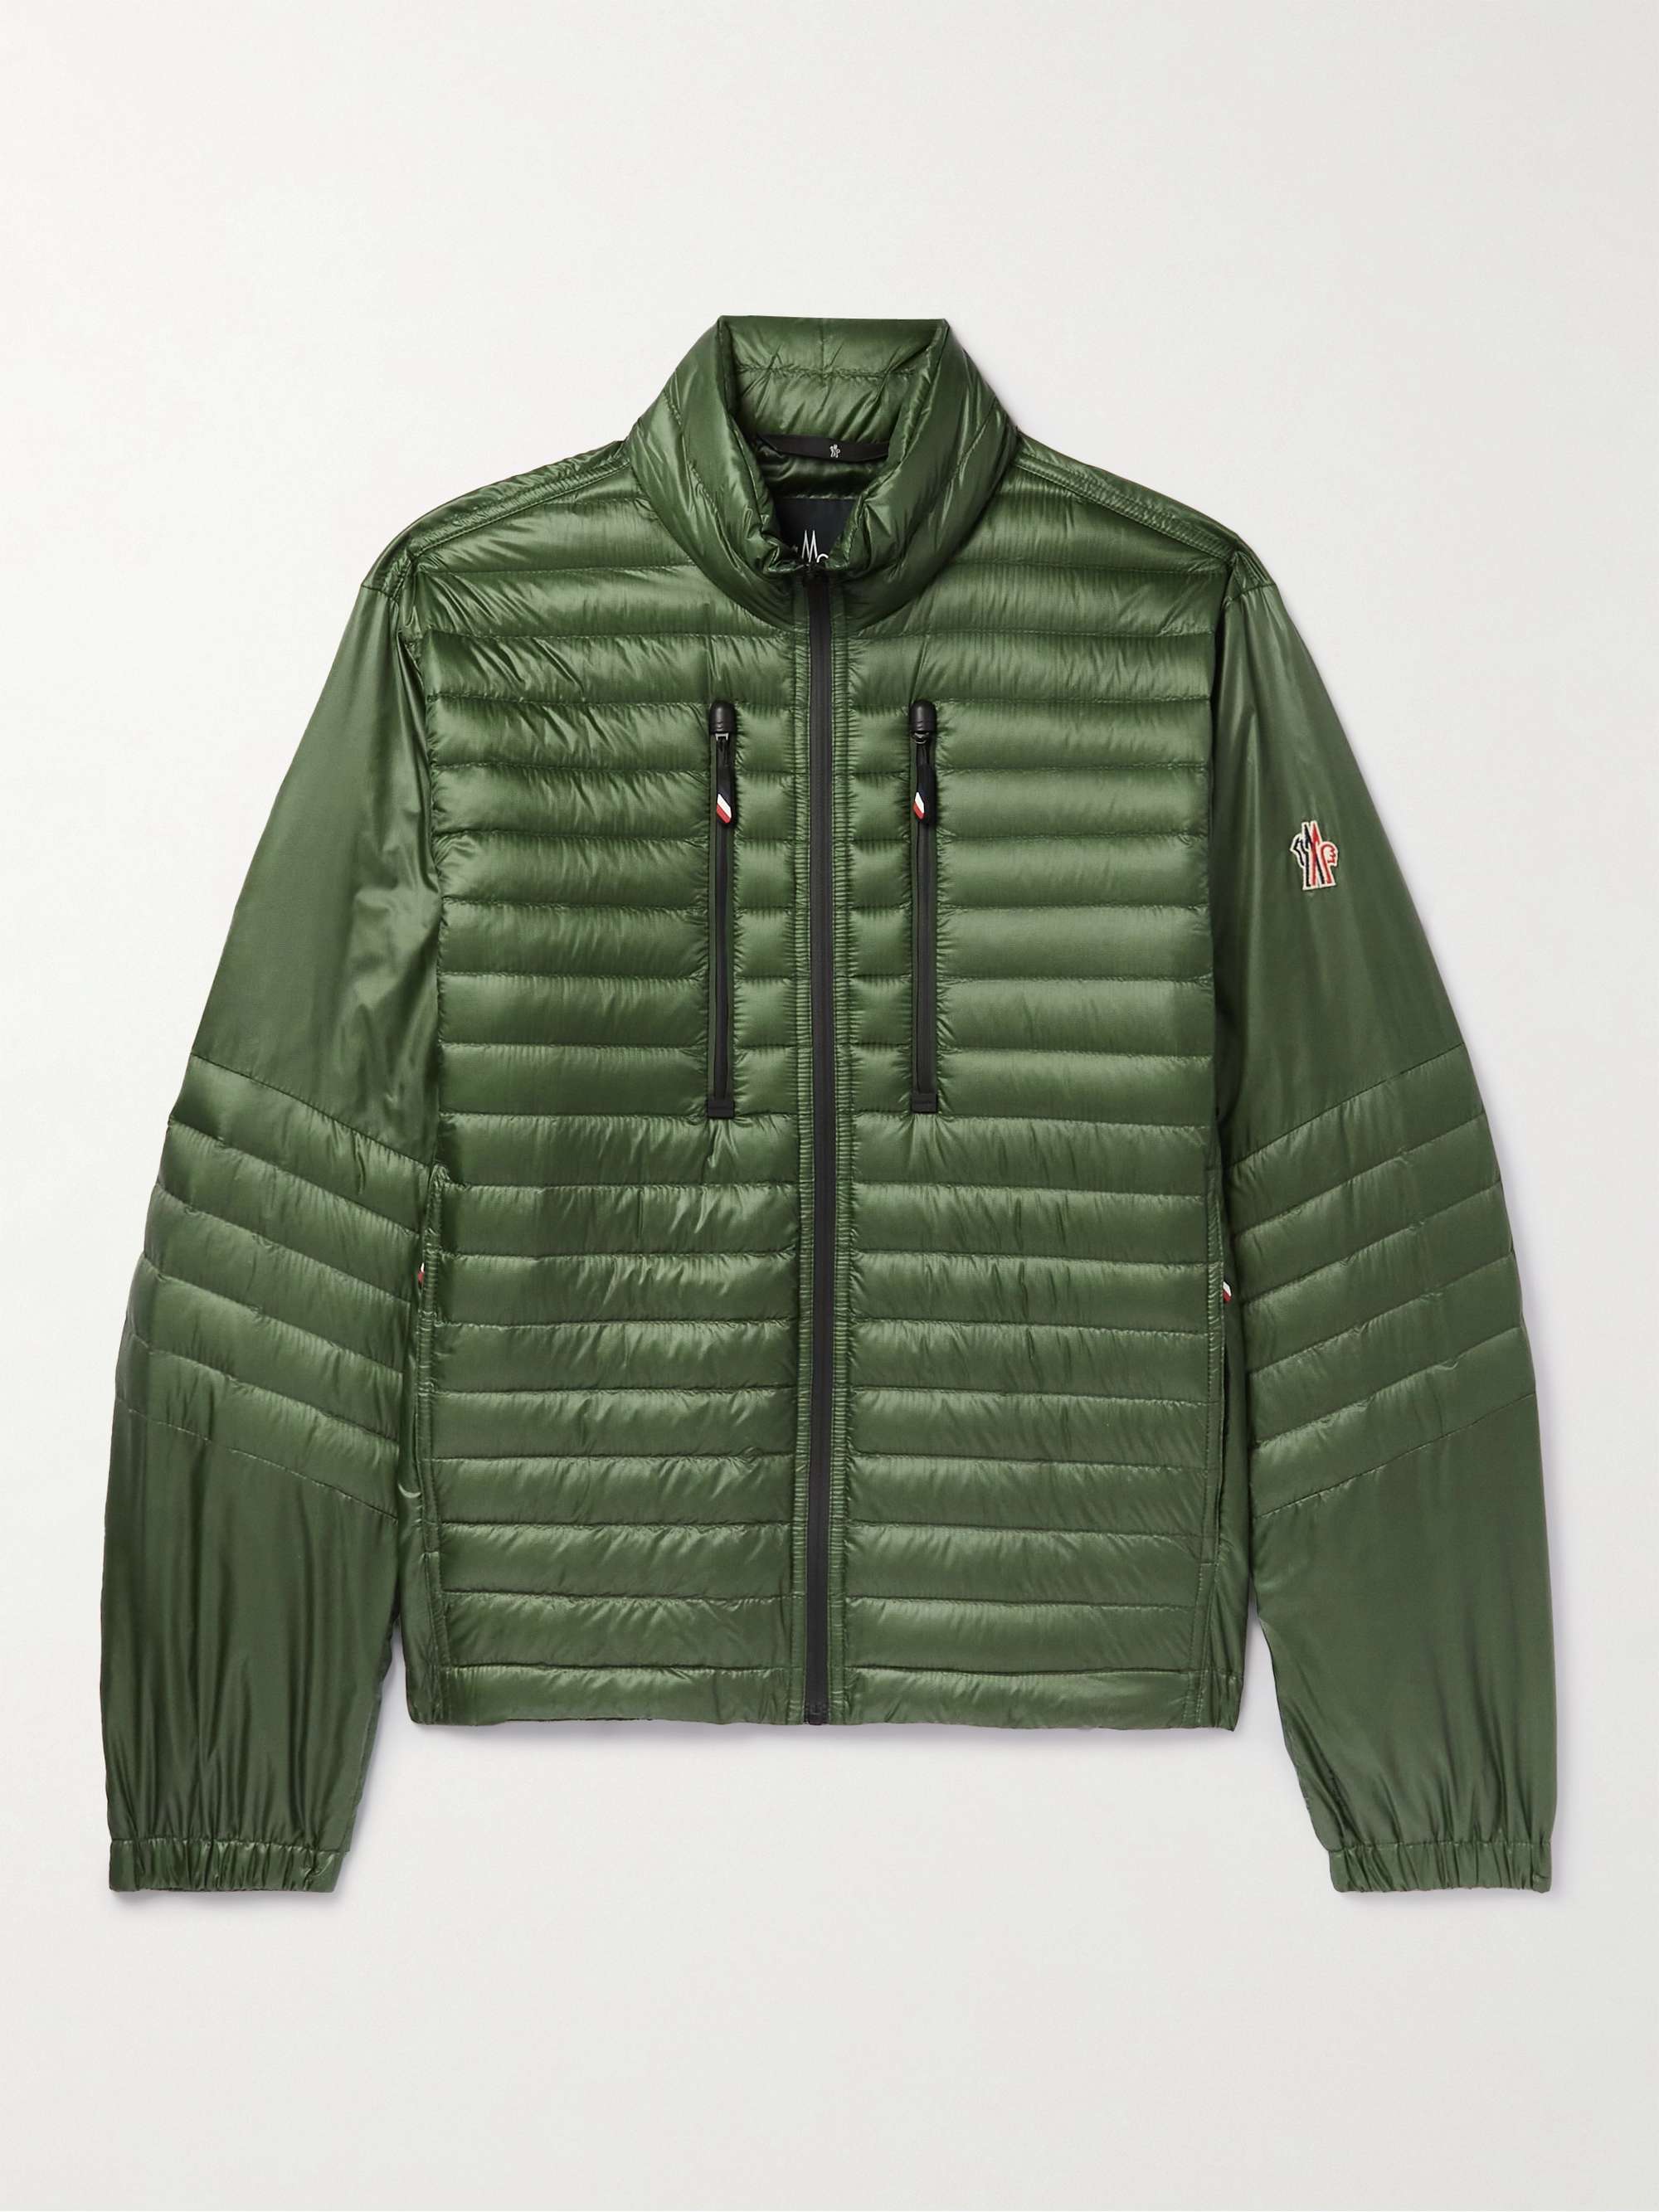 MONCLER GRENOBLE Althaus Logo-Appliquéd Quilted Ripstop Down Jacket